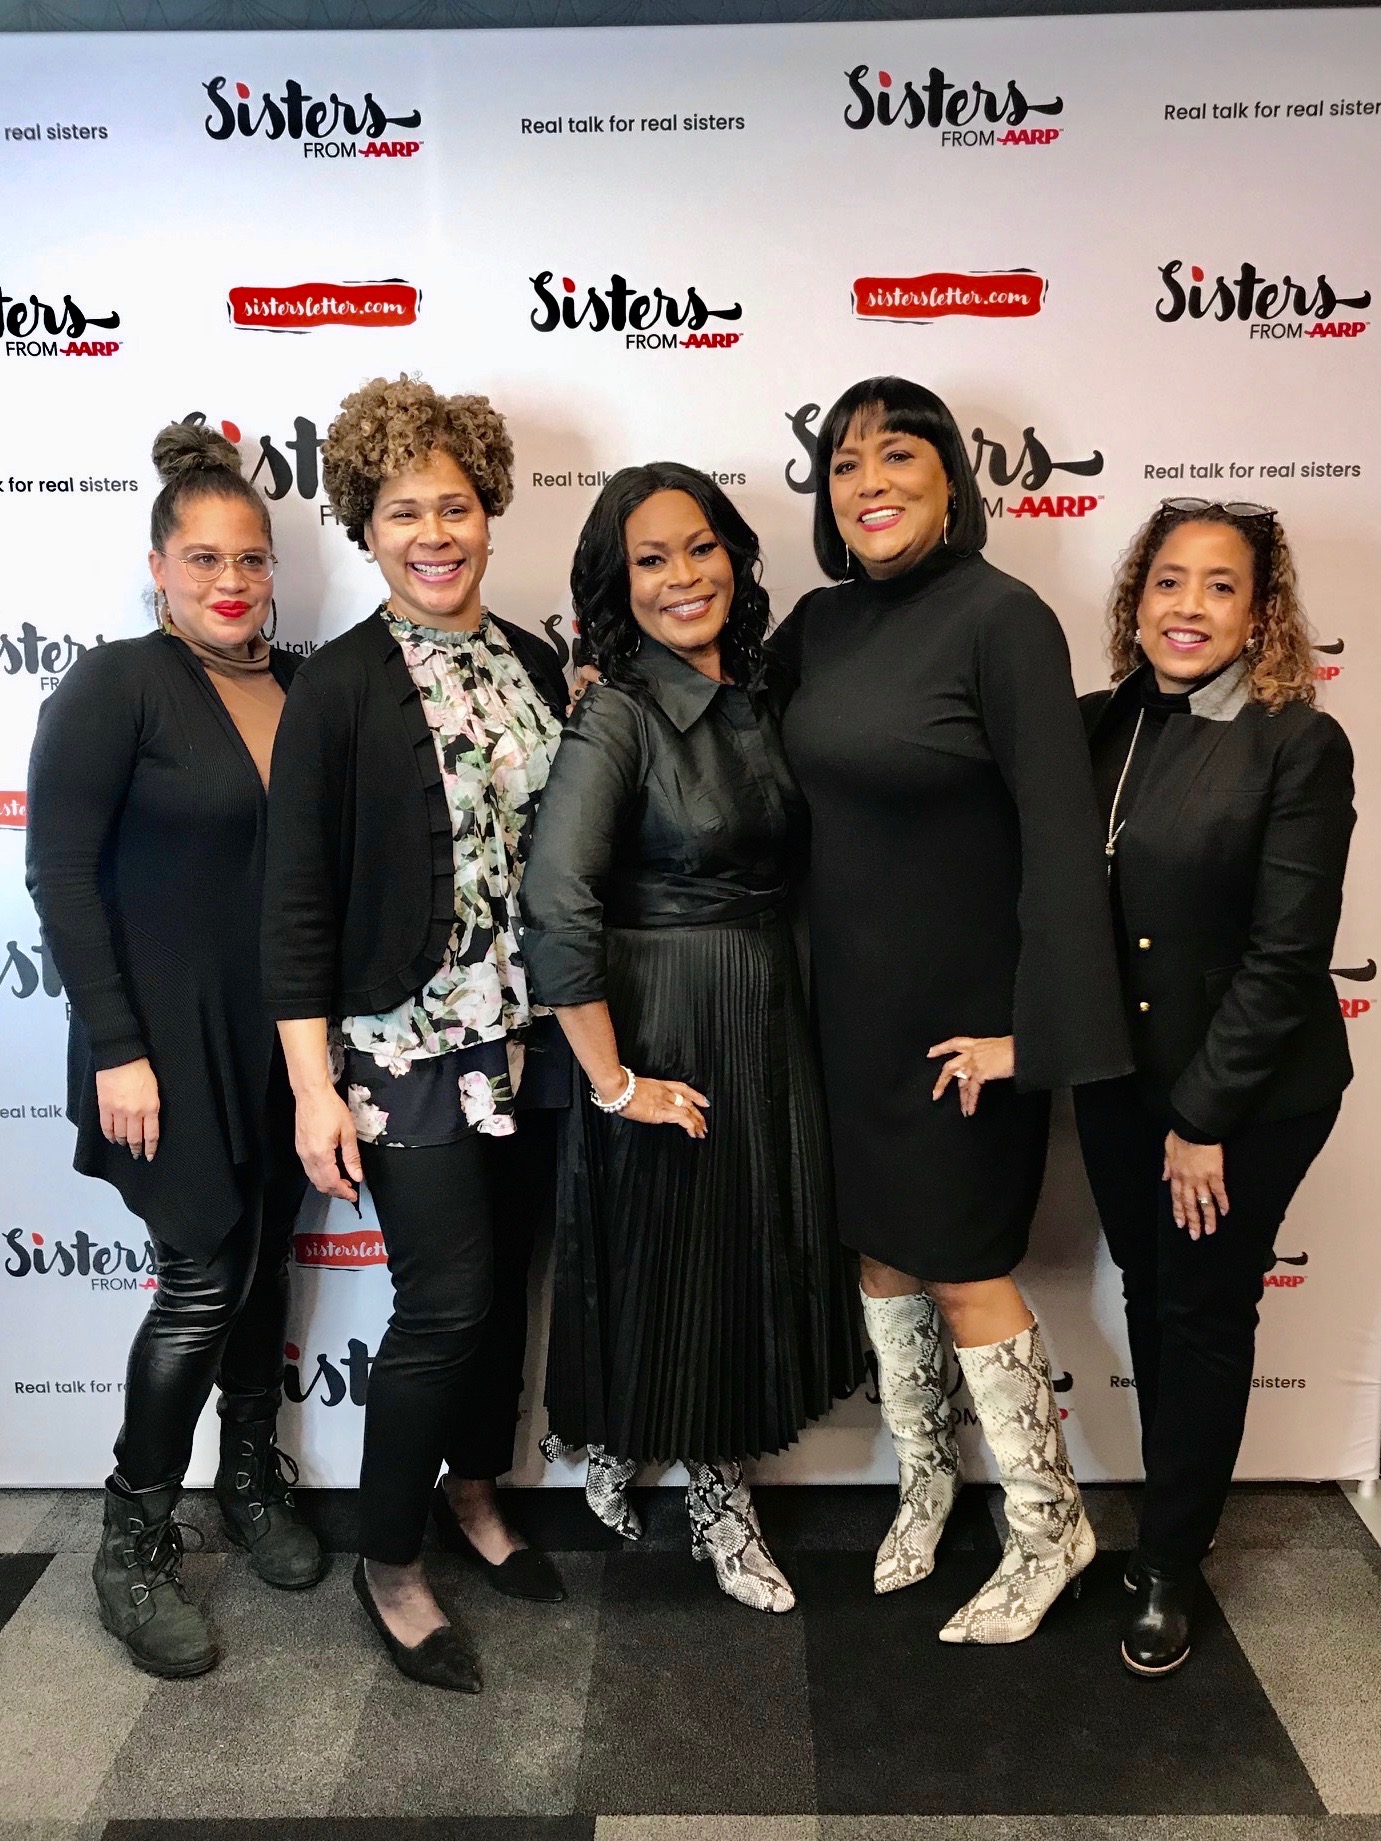 AARP, Sisters from AARP, Claire McIntosh and her content staff with winners of the Sisterhood Is Beautiful Makeover Contest